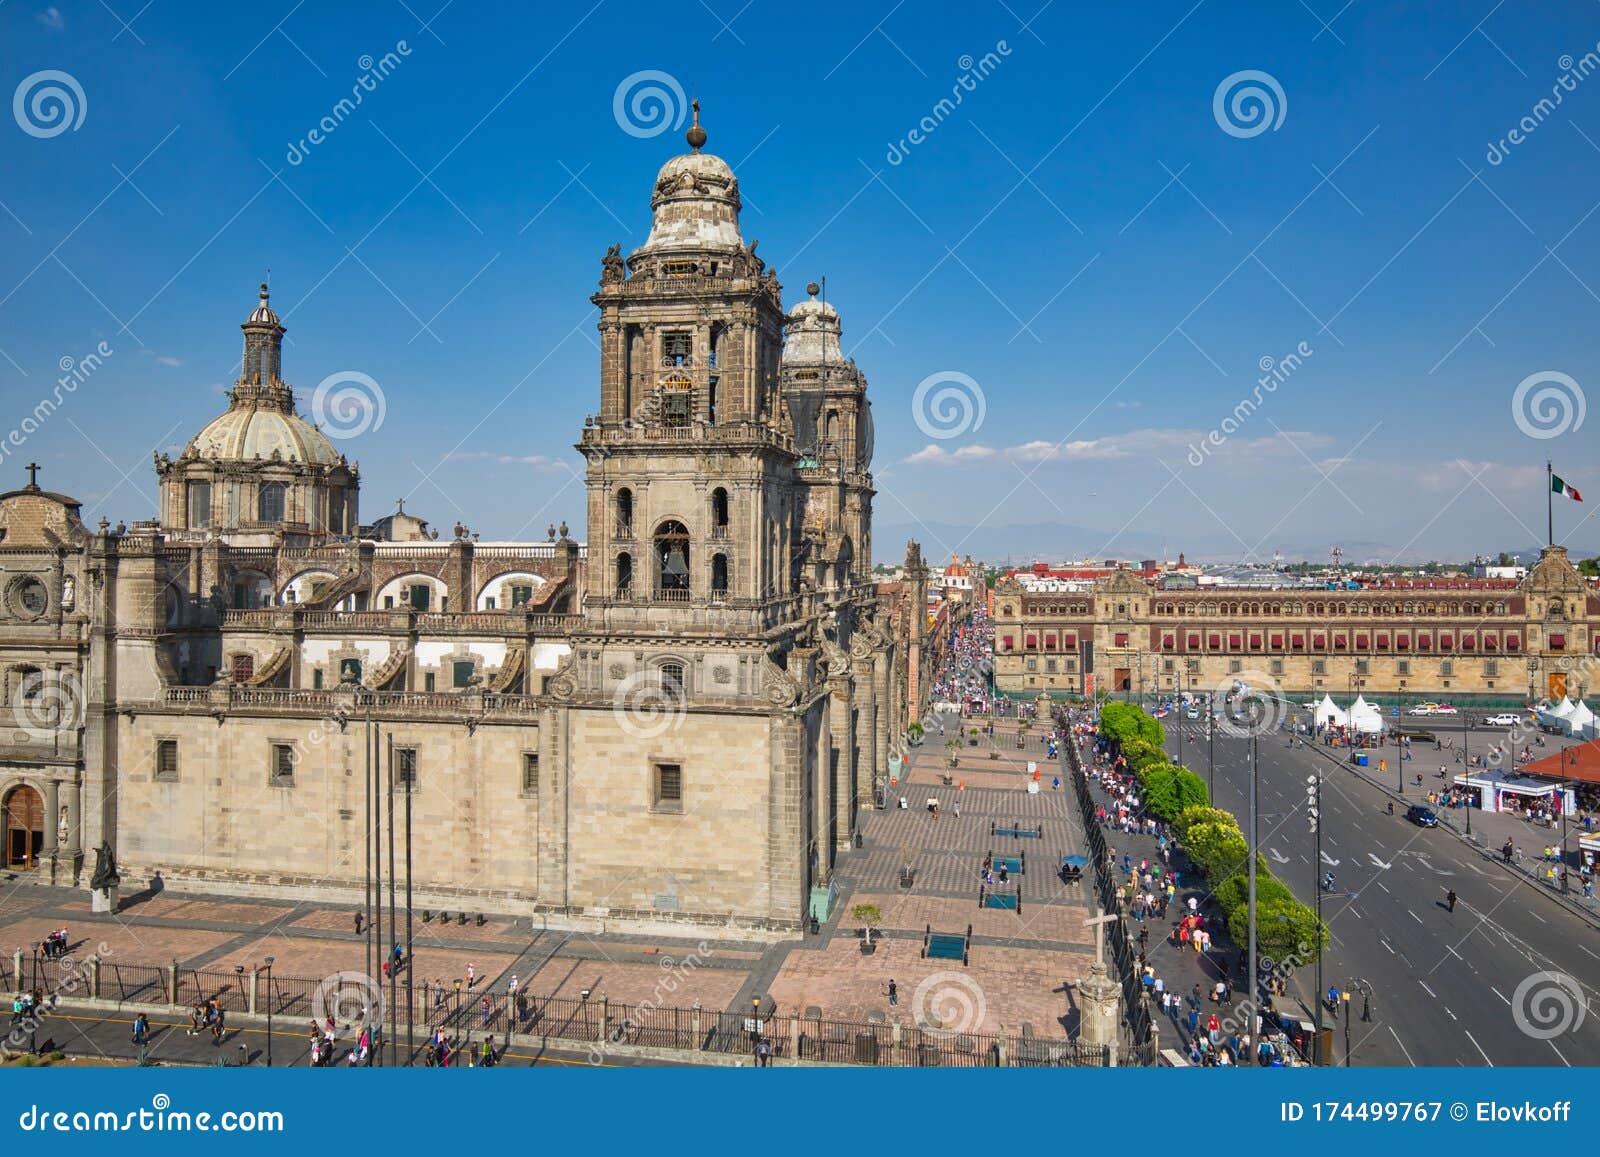 mexico city central zocalo plaza and streets